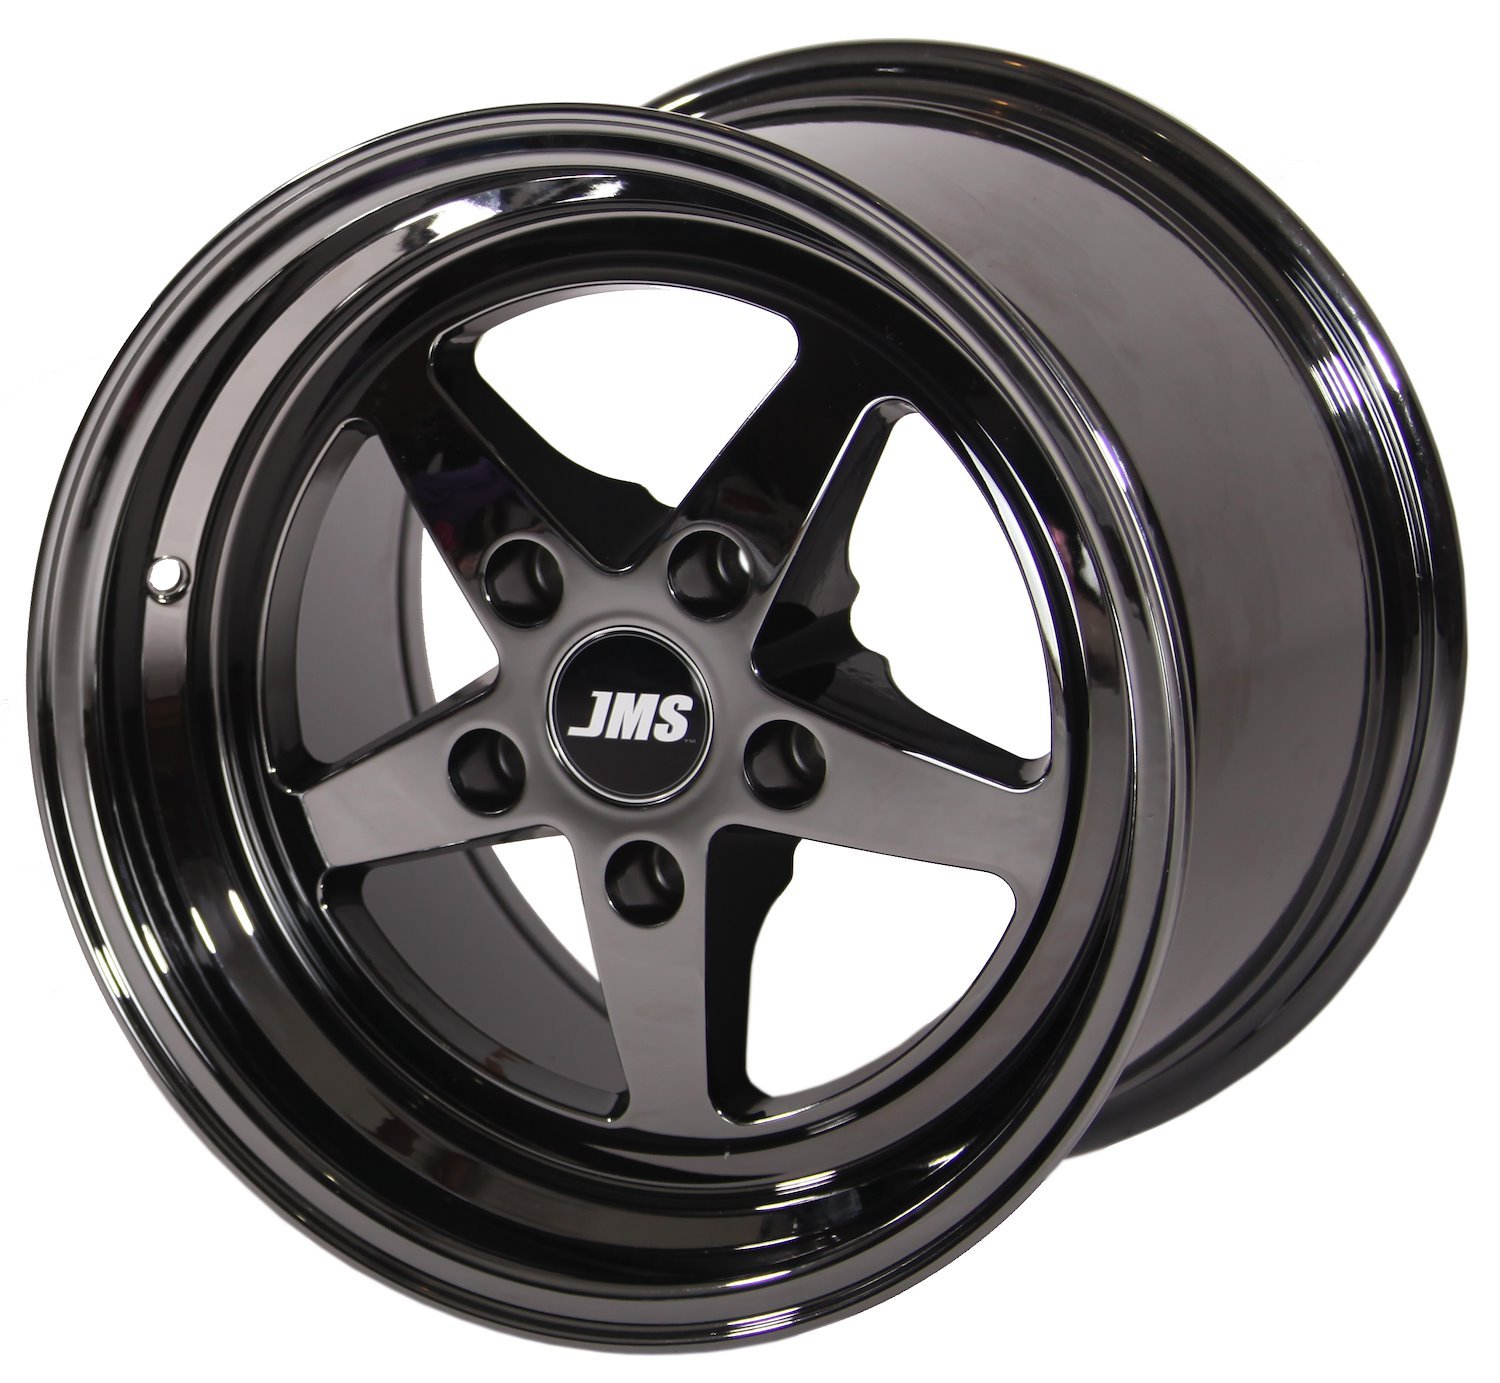 Avenger Racing Wheel 1994-2019 Ford Mustang and 2007-2012 Shelby GT500